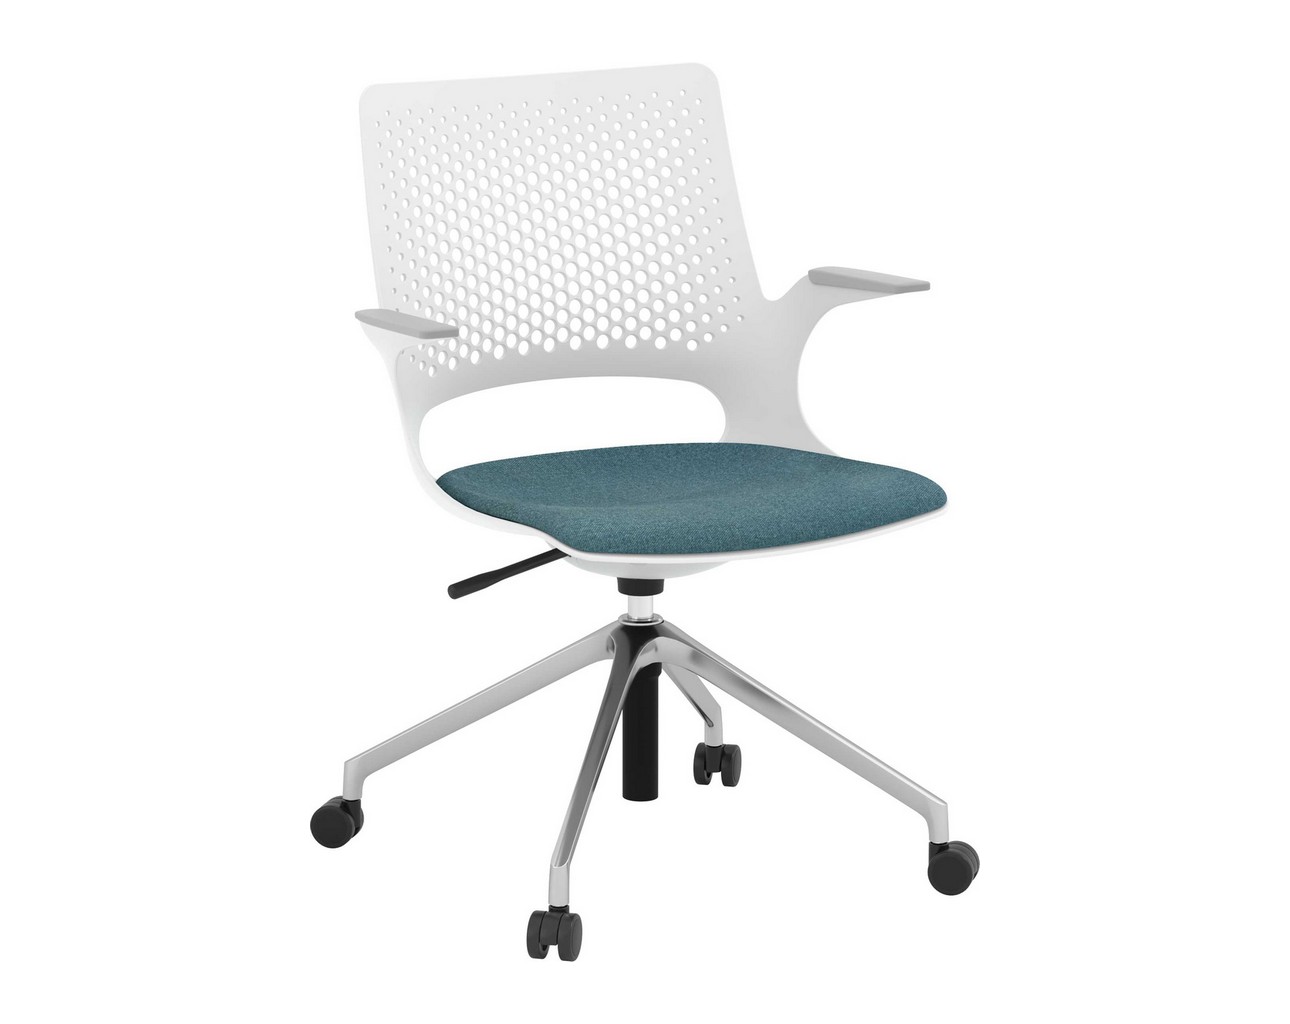 Harmony Multi-Purpose Chair – Polished Aluminum Base and Light Grey Frame with Teal Seat